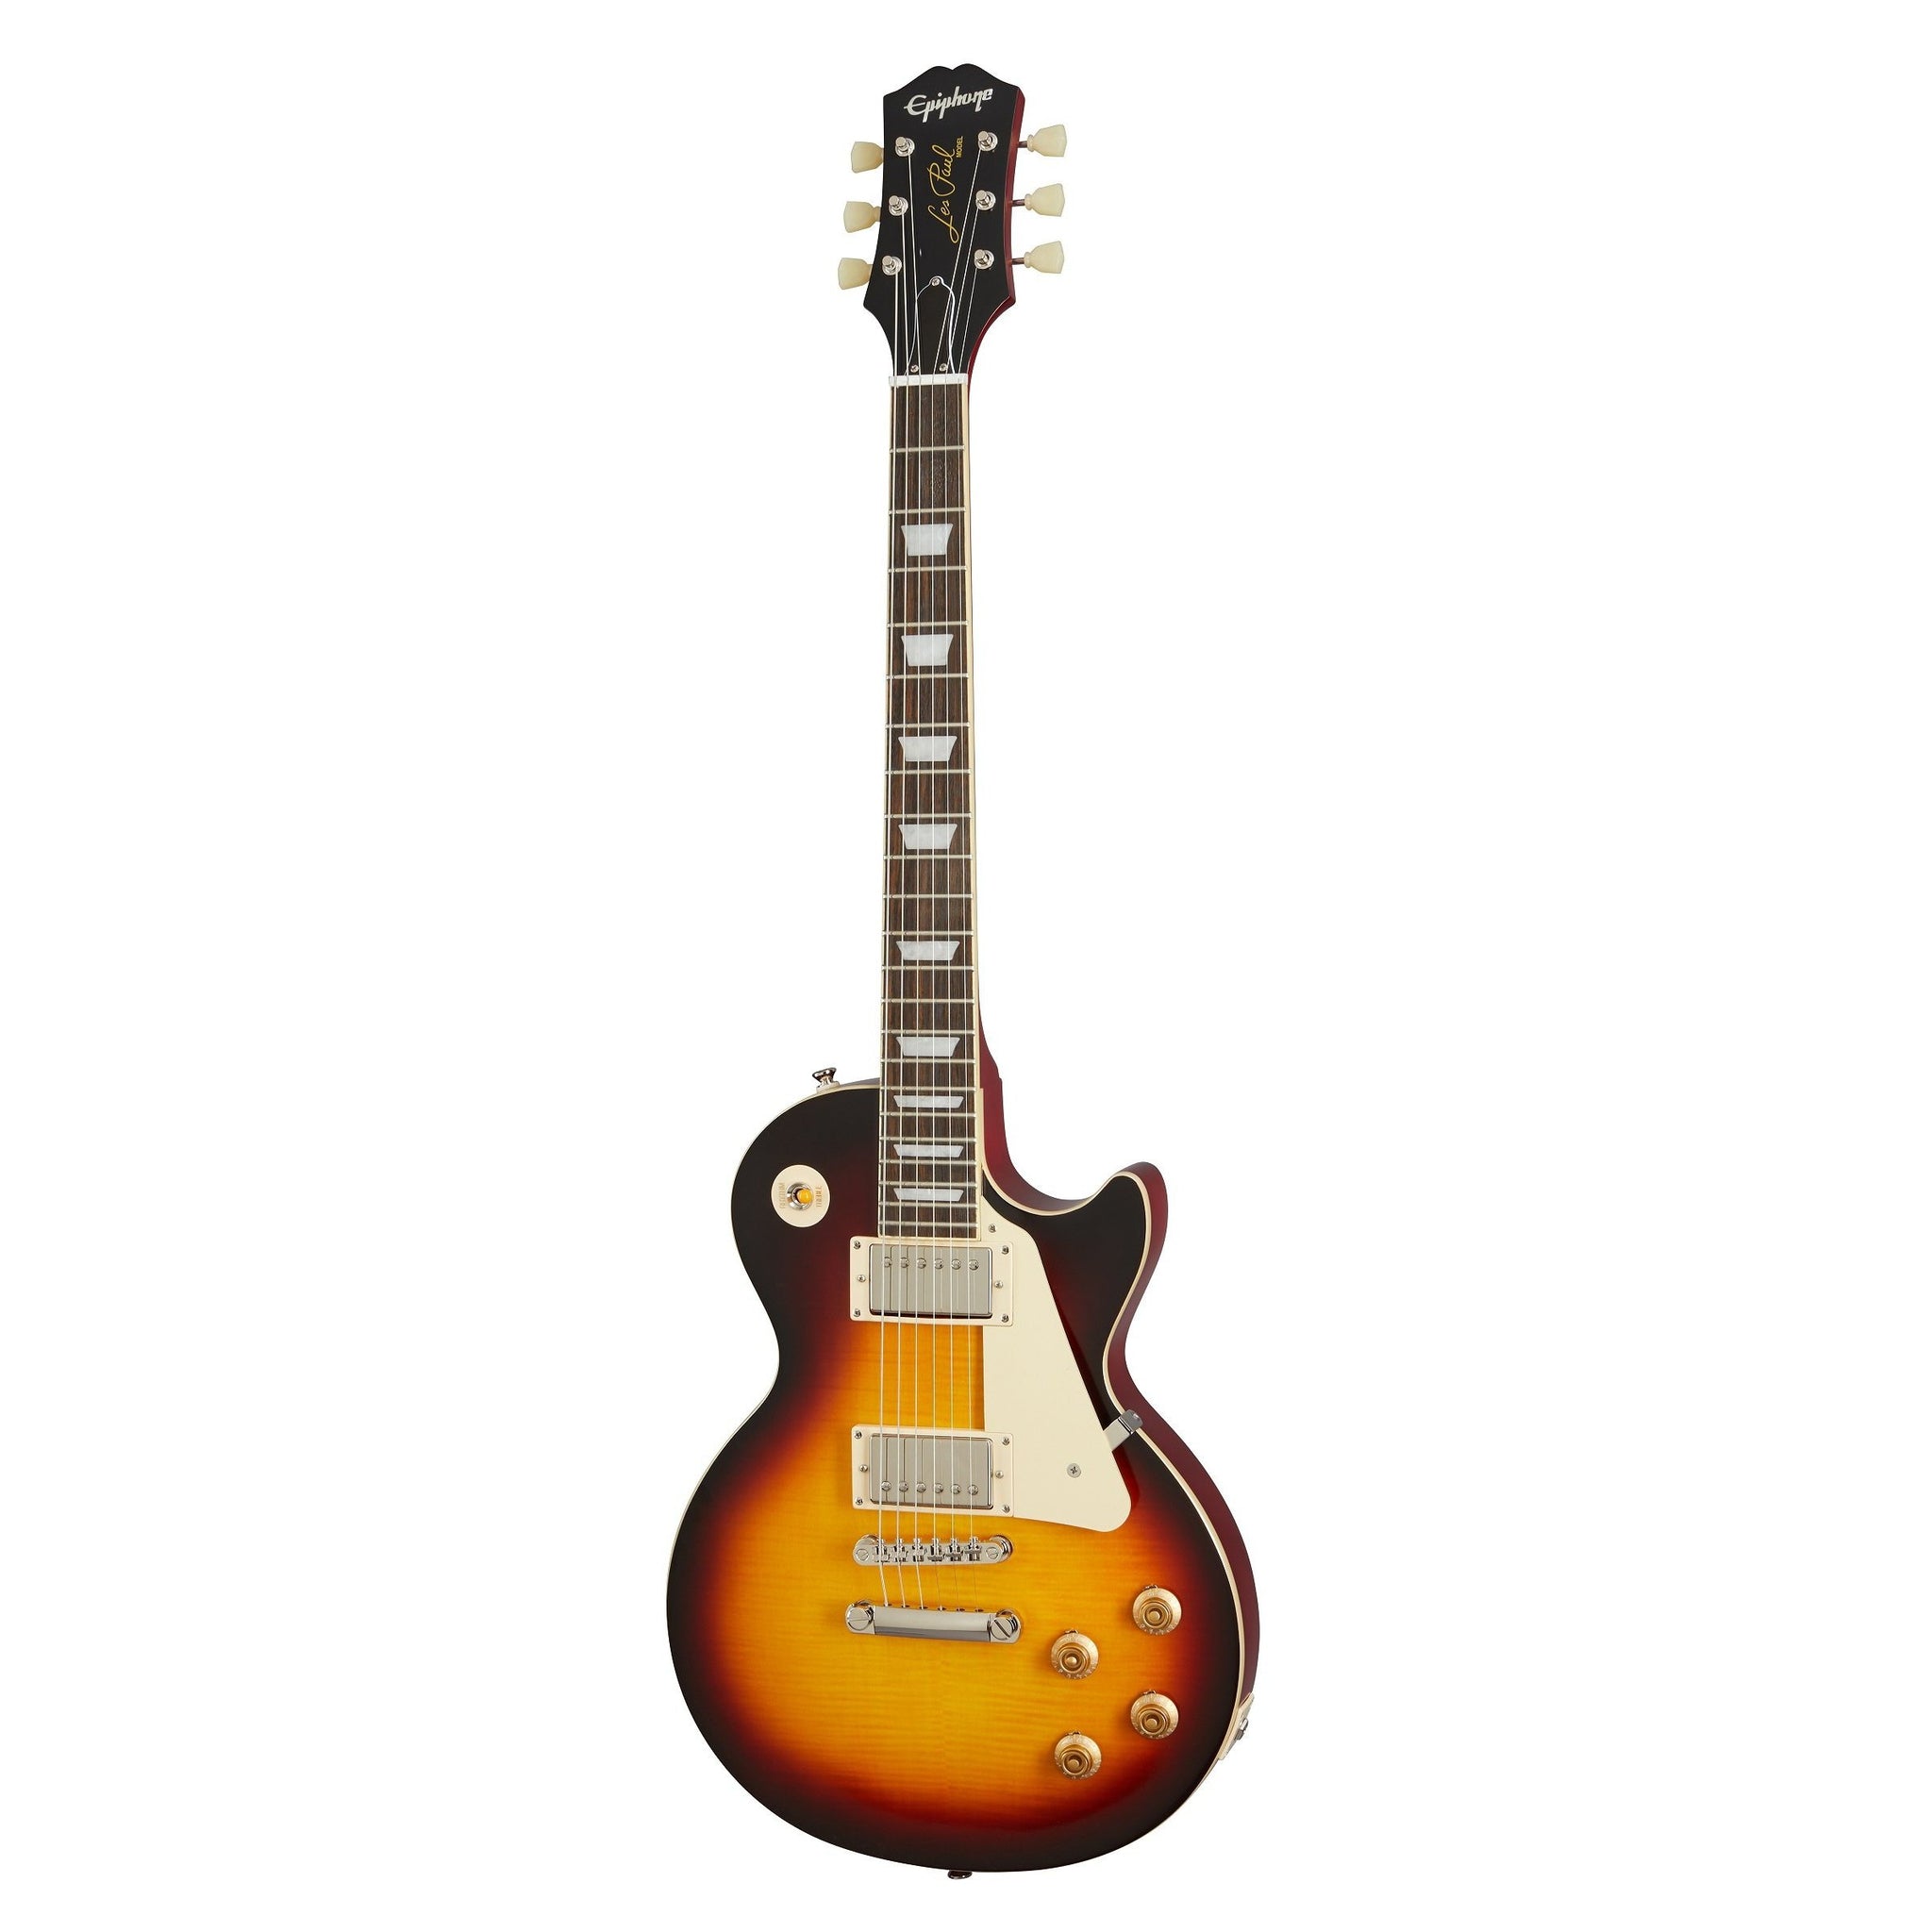 Epiphone EL59ADBNH Limited Edition 1959 Les Paul Standard Electric Guitar with Hardshell Case-Aged Dark Burst-Music World Academy